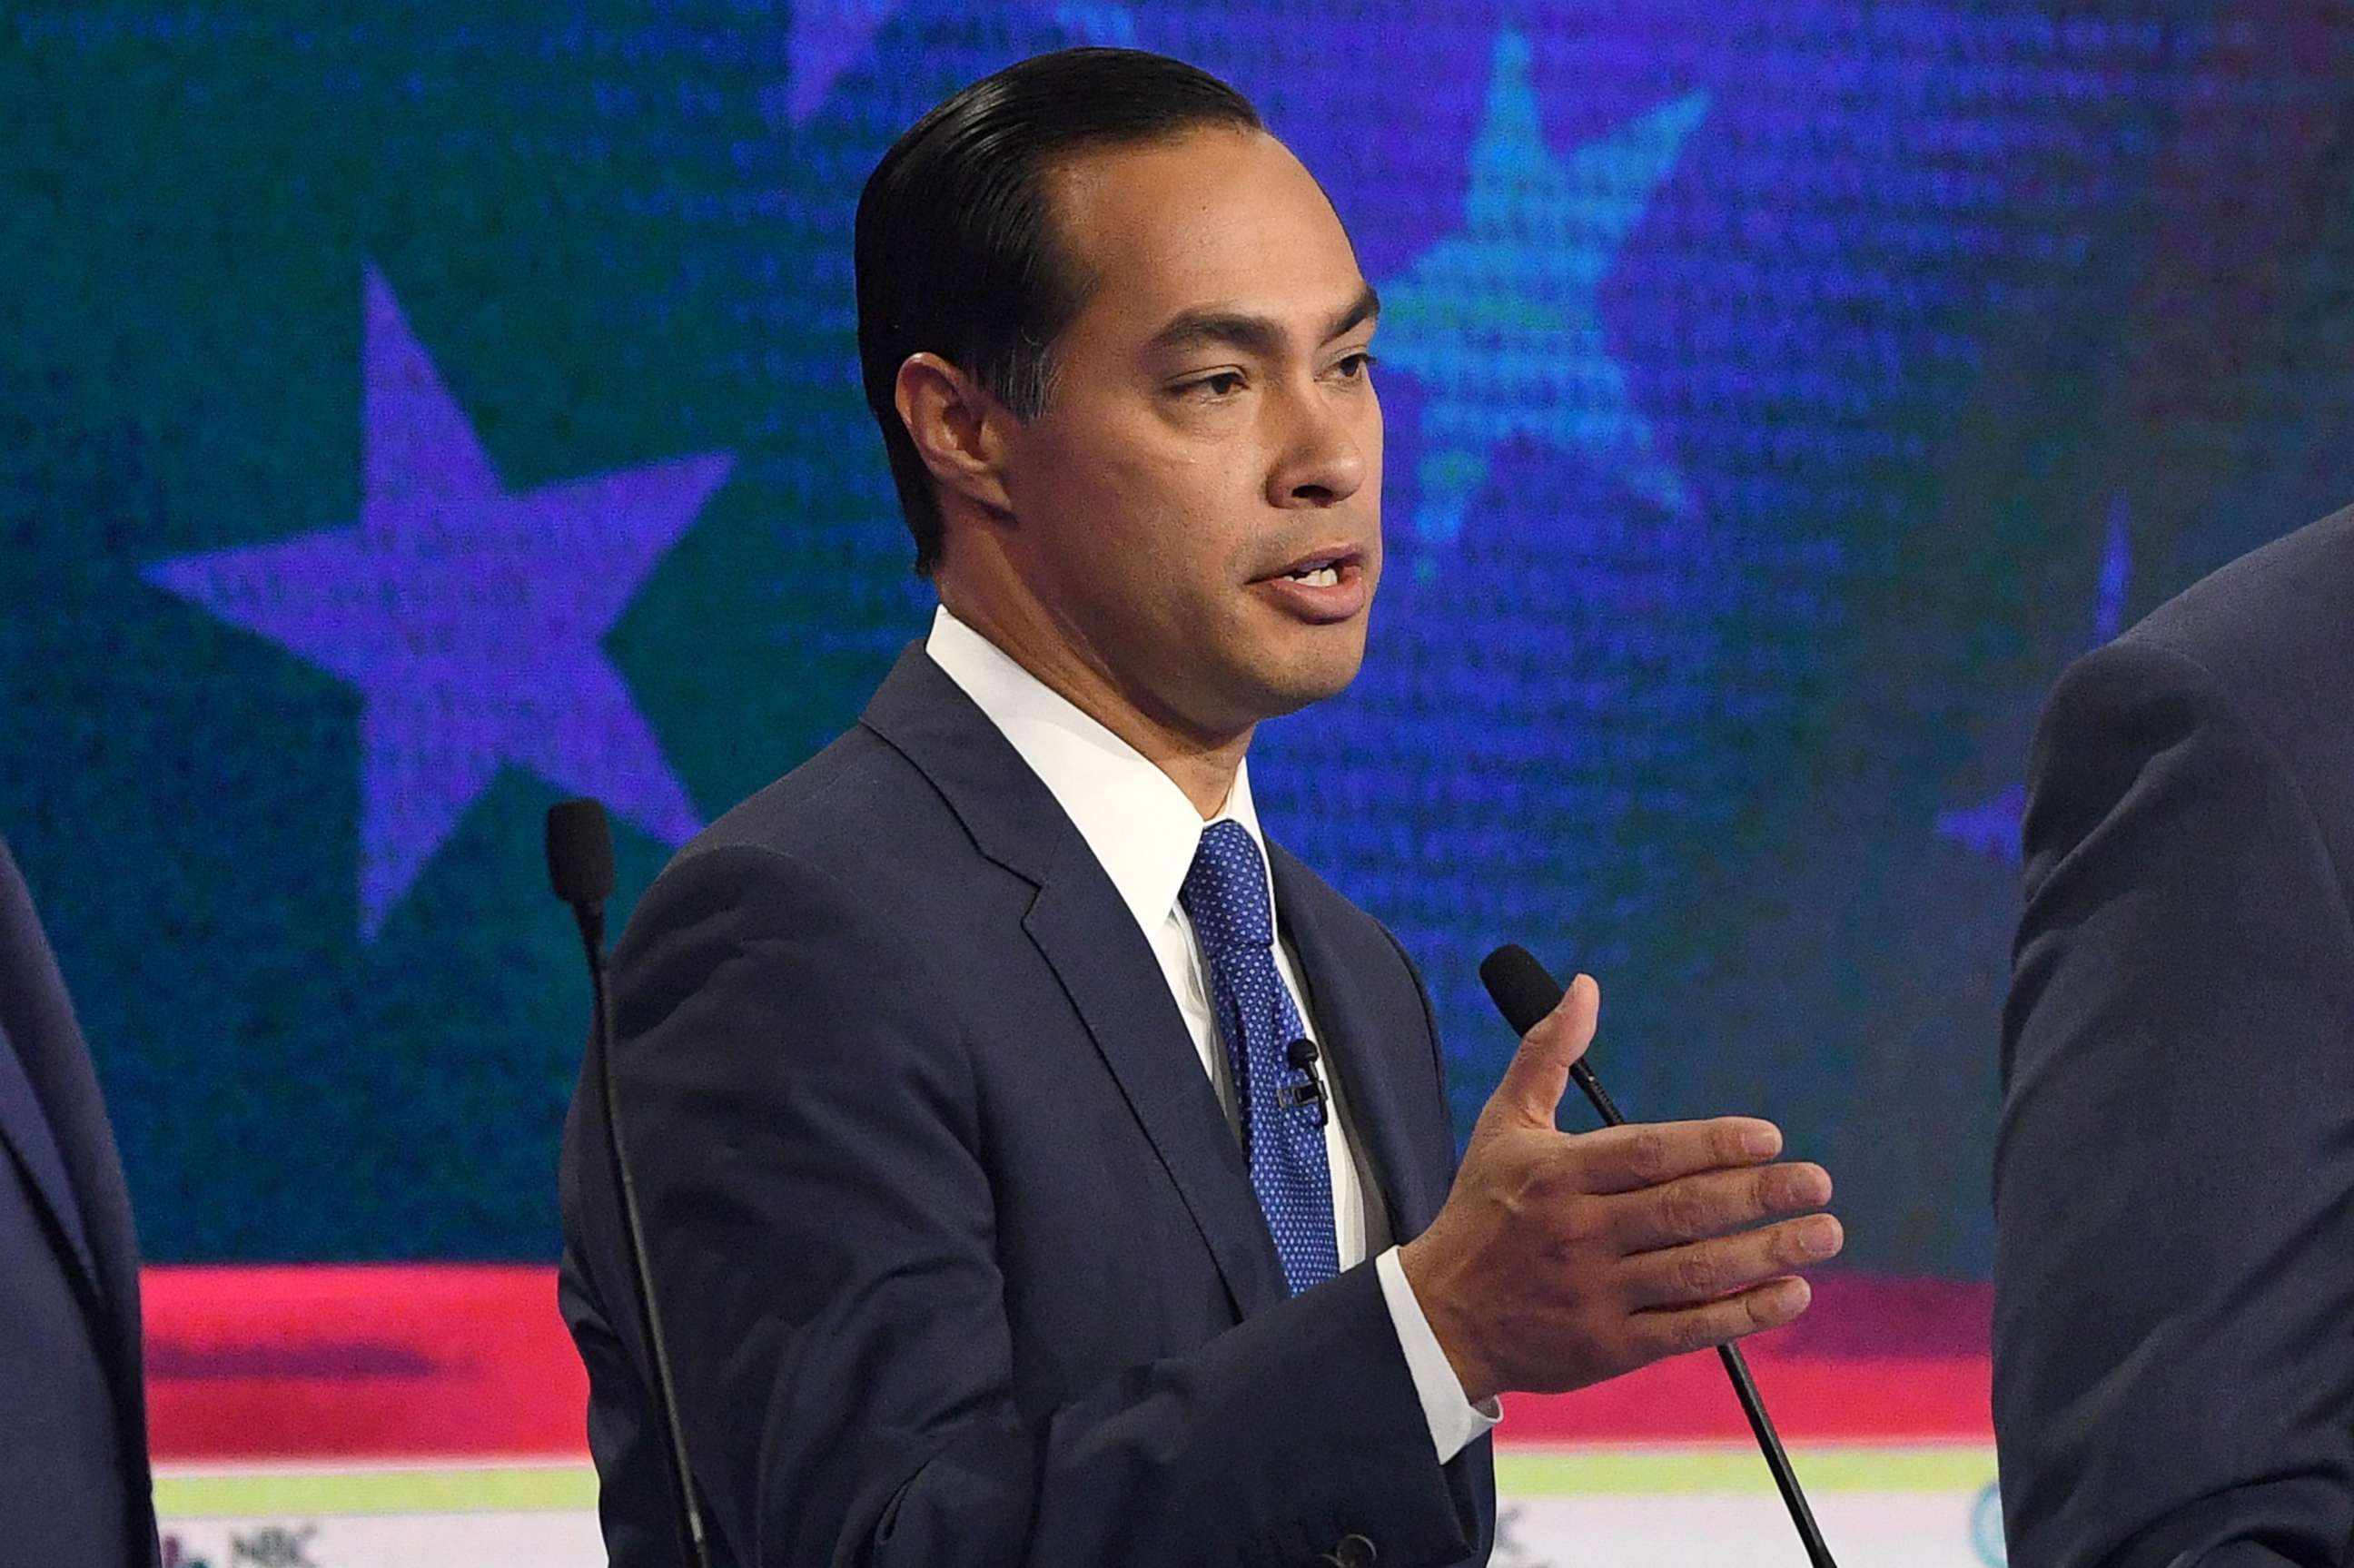 PHOTO: Julian Castro participates in the first Democratic primary debate hosted by NBC News at the Adrienne Arsht Center for the Performing Arts in Miami, Florida, June 26, 2019.